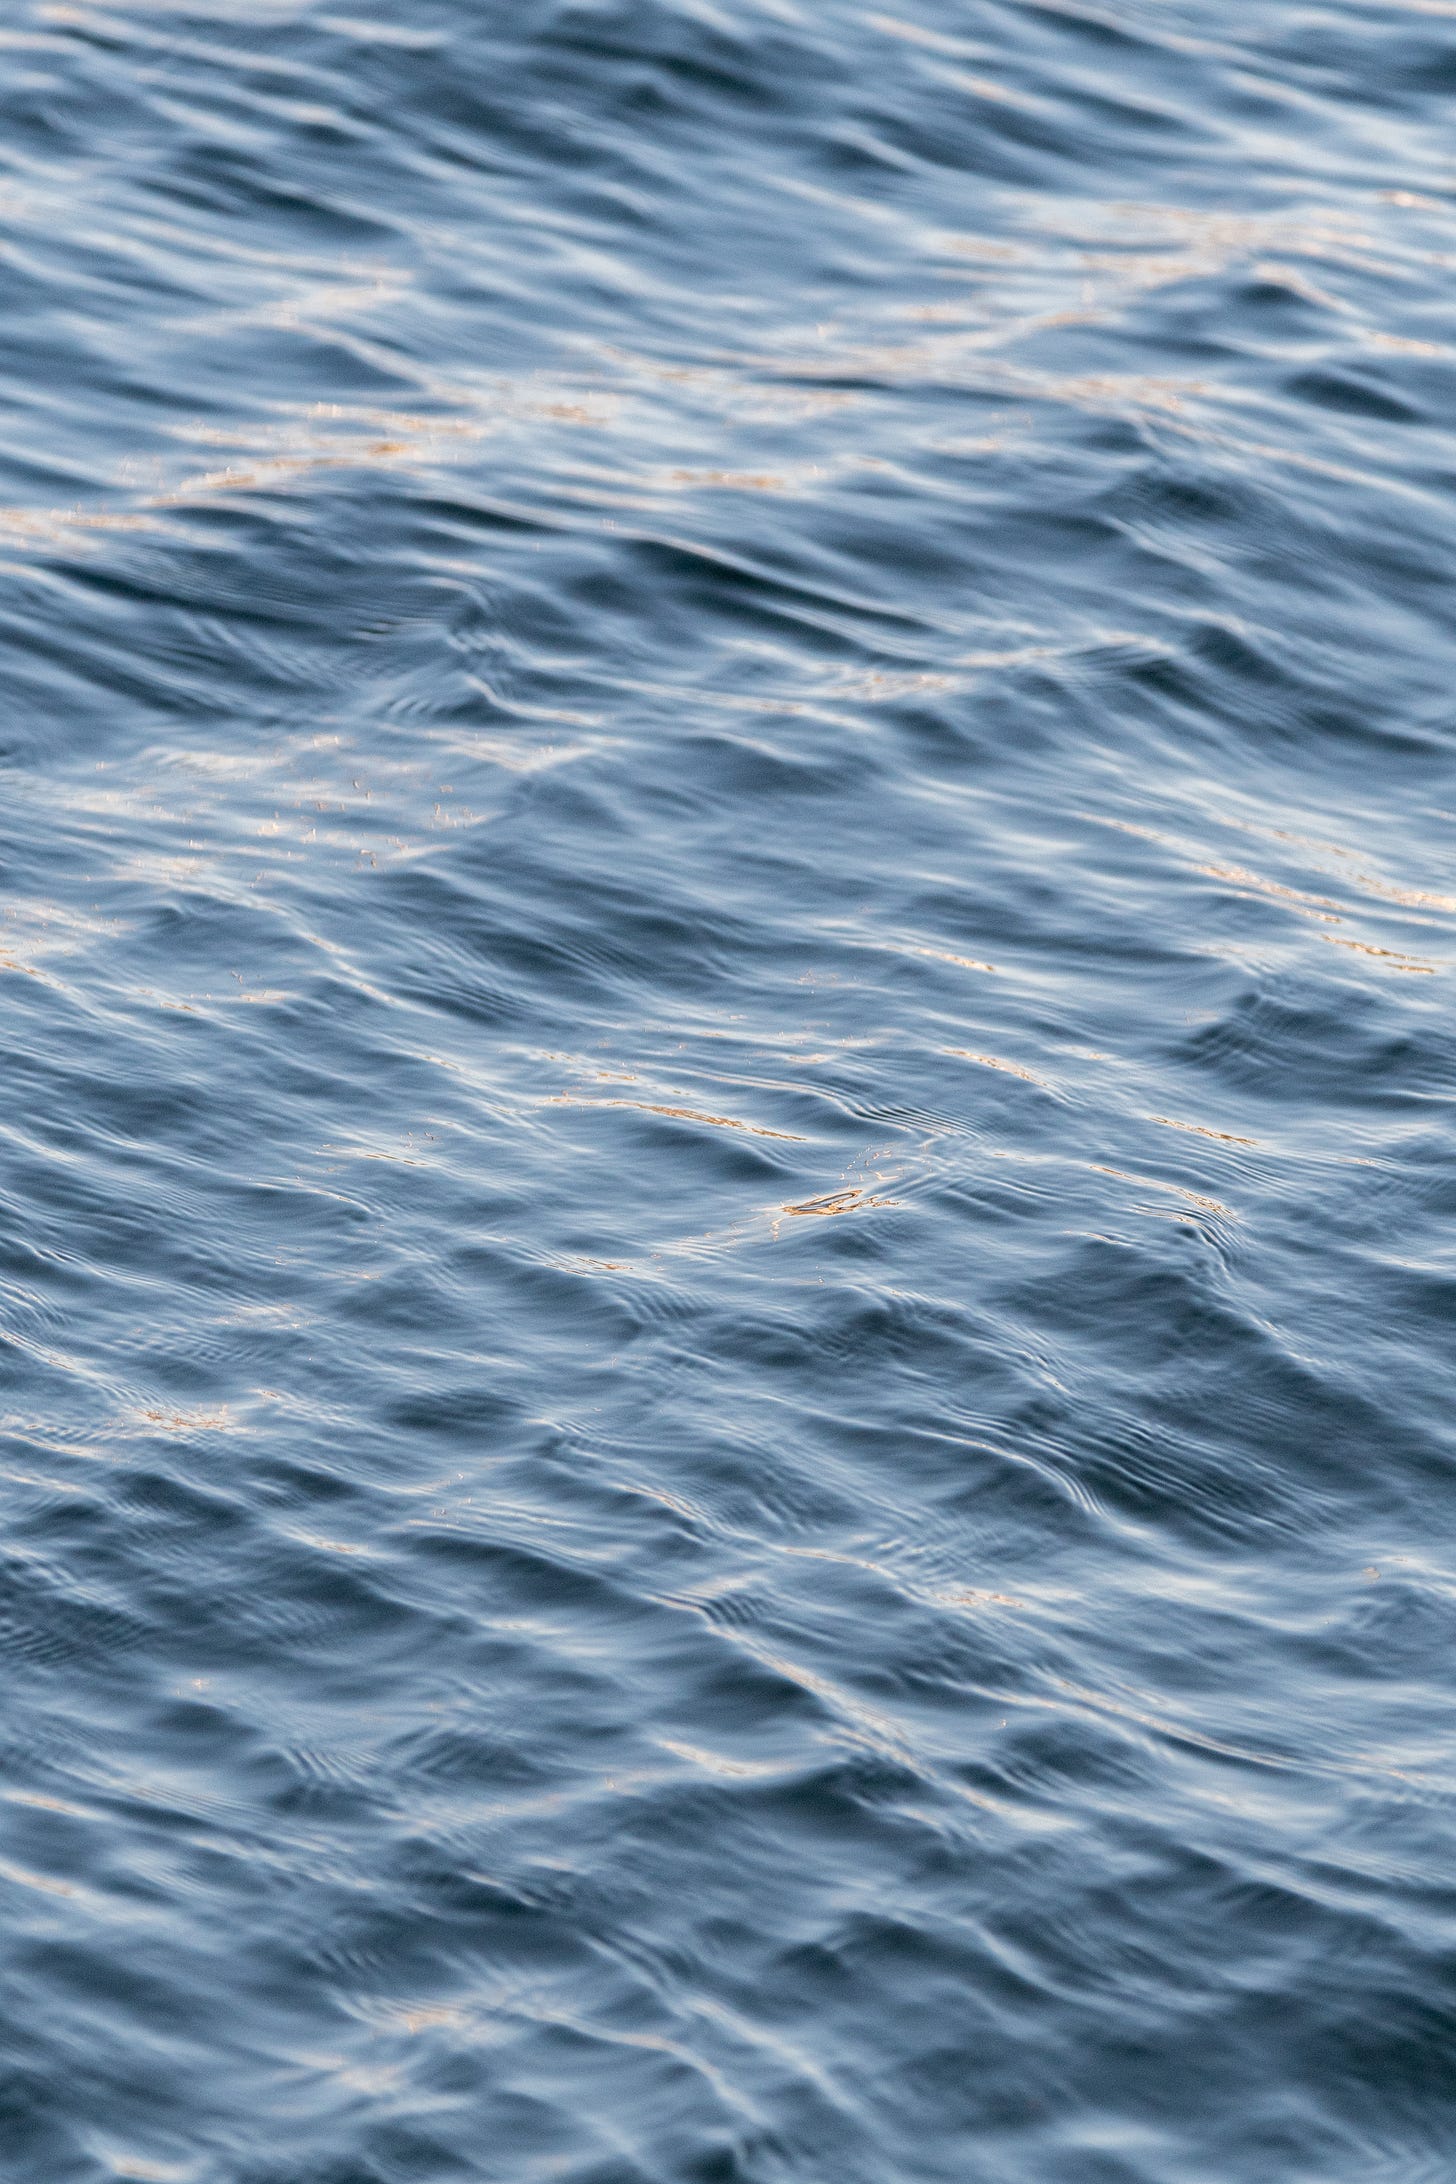 A photograph of ocean water, greenish, crossed by soft, tessellated ripples